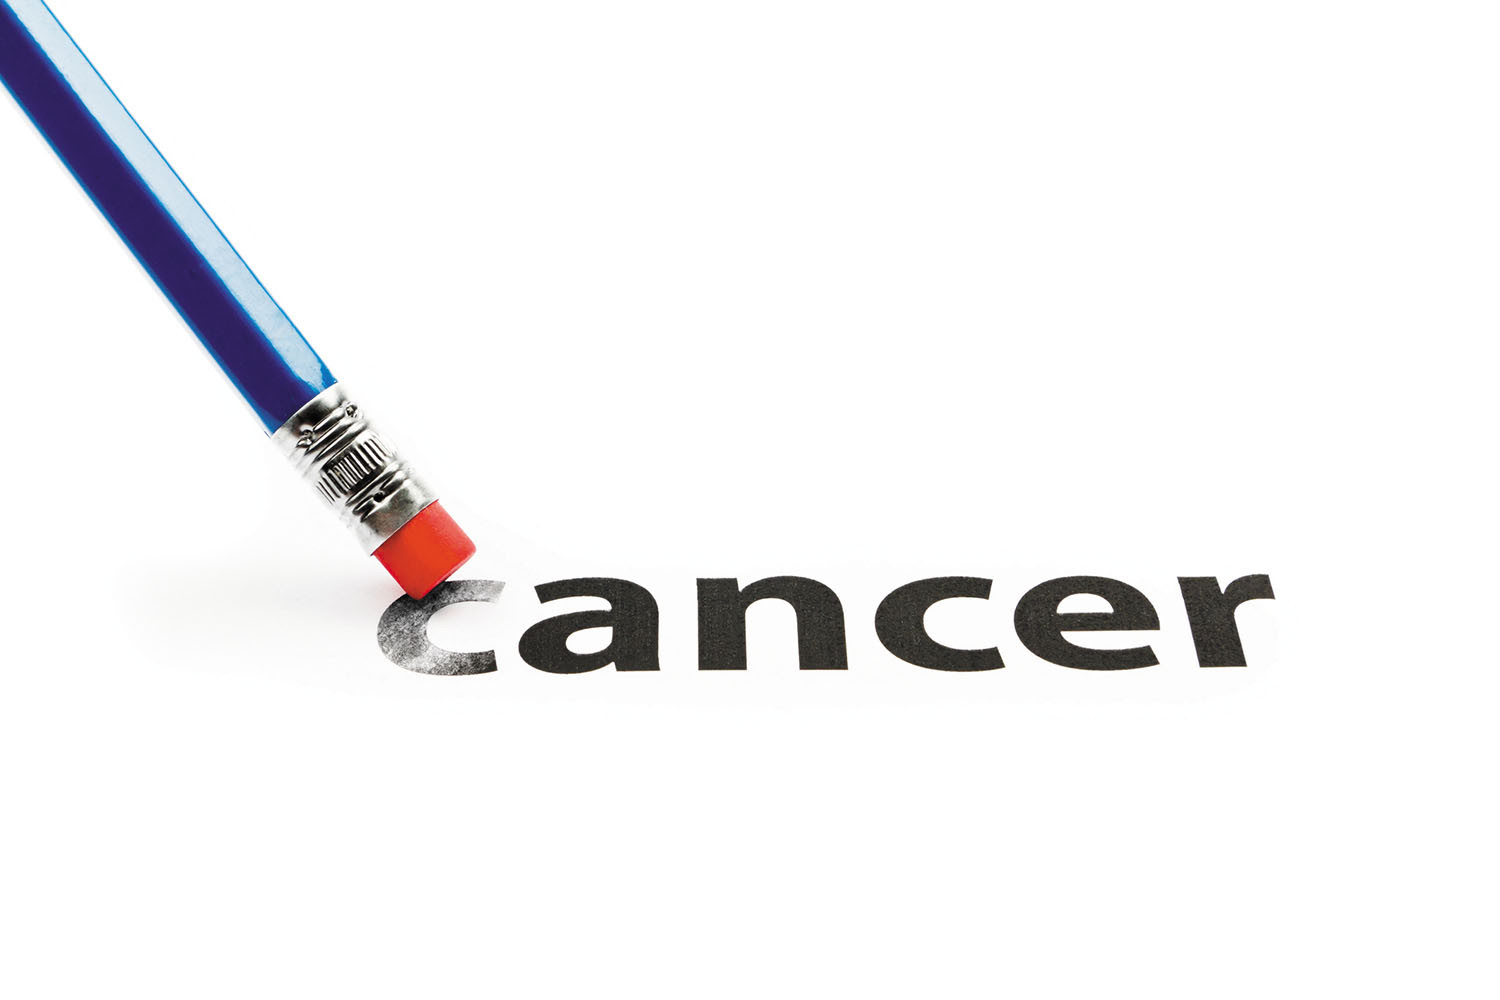 illustration of the word cancer being erased from the first C by a red pencil eraser on a blue pencil